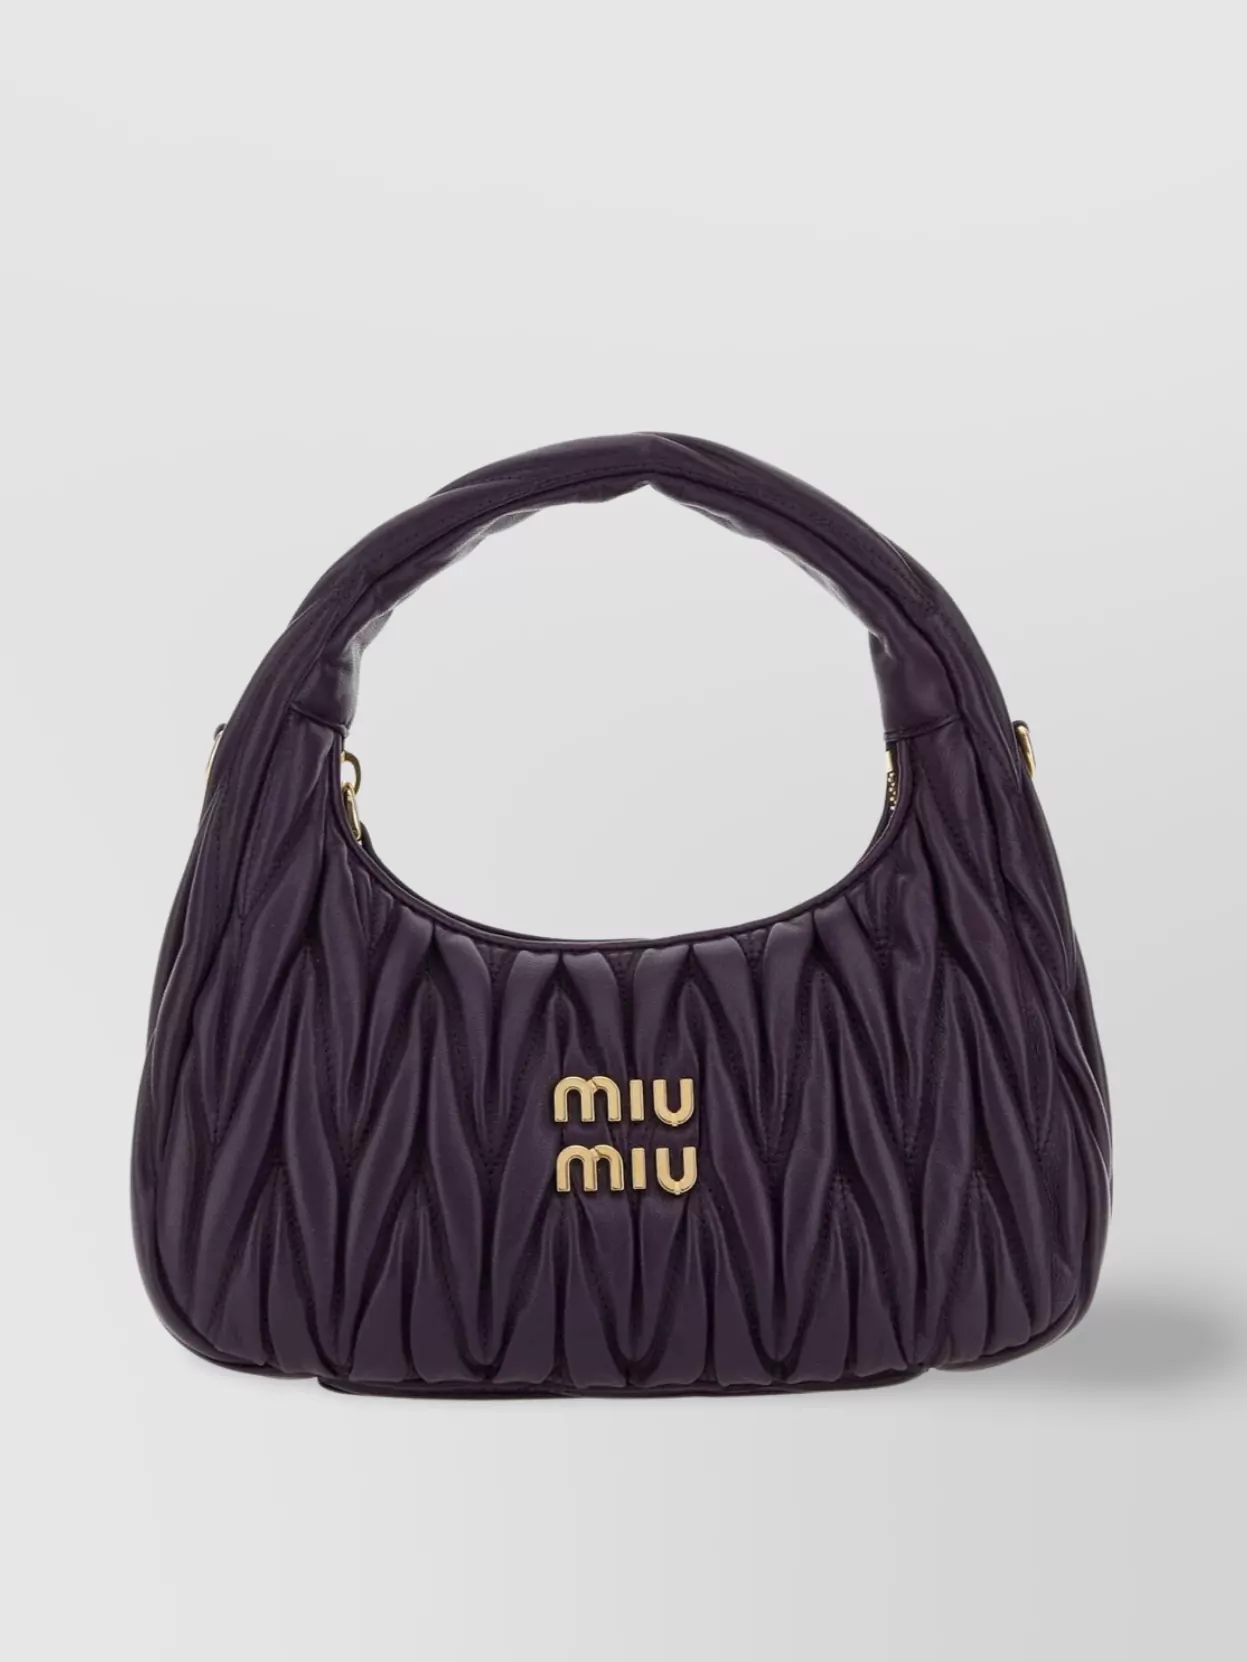 Miu Miu Quilted Leather Shoulder Bag With Gold Hardware In Purple